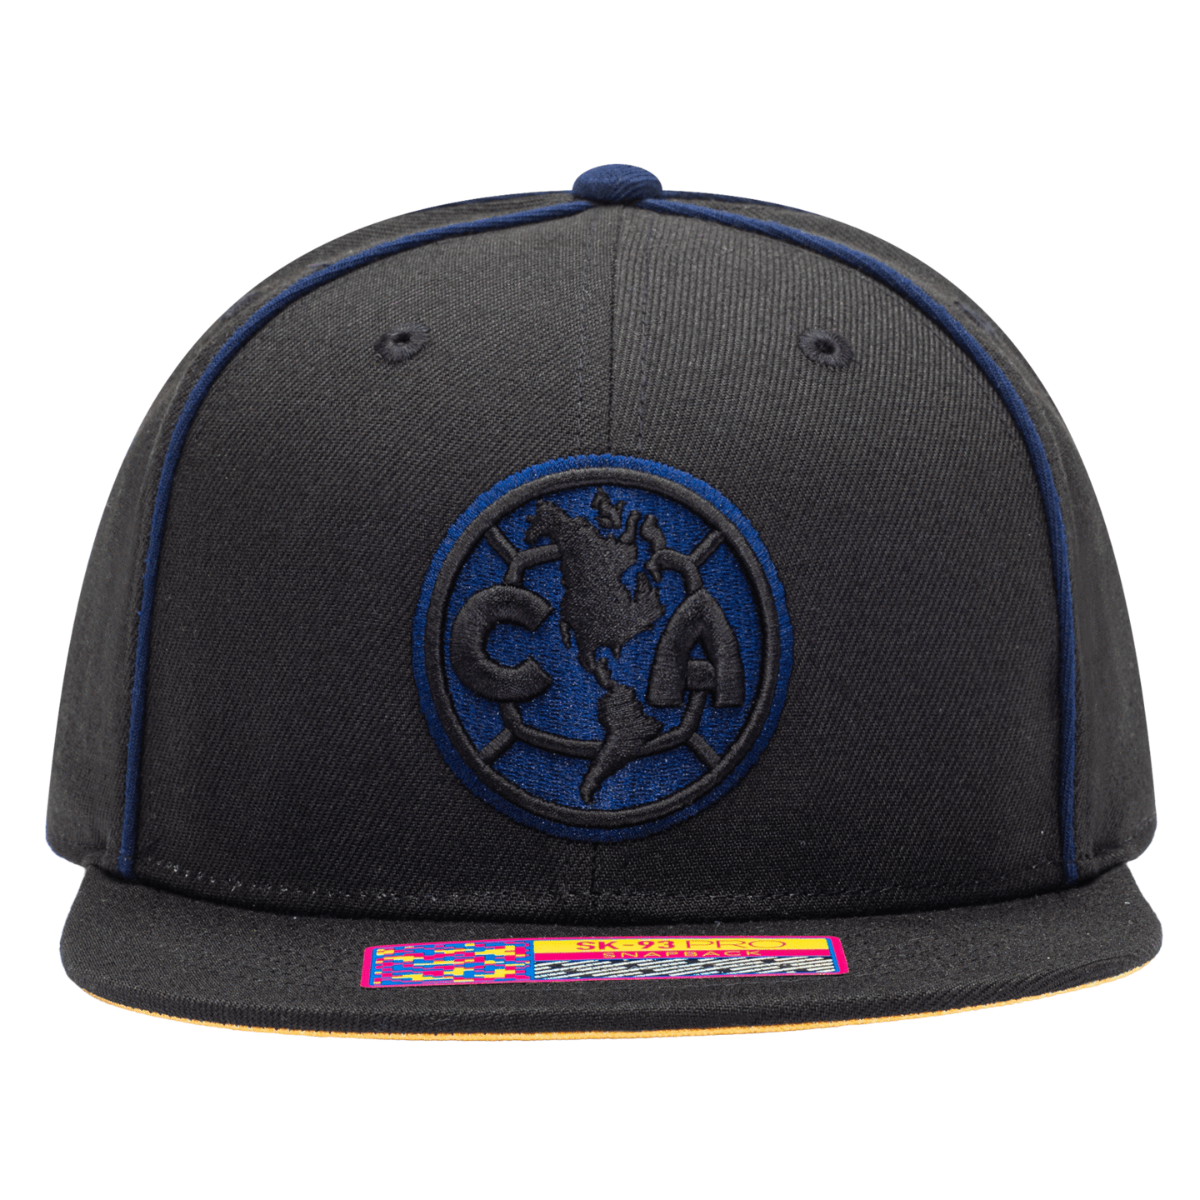 FI Collection Club America Cali Night Snapback Hat - Black-Blue (Front)